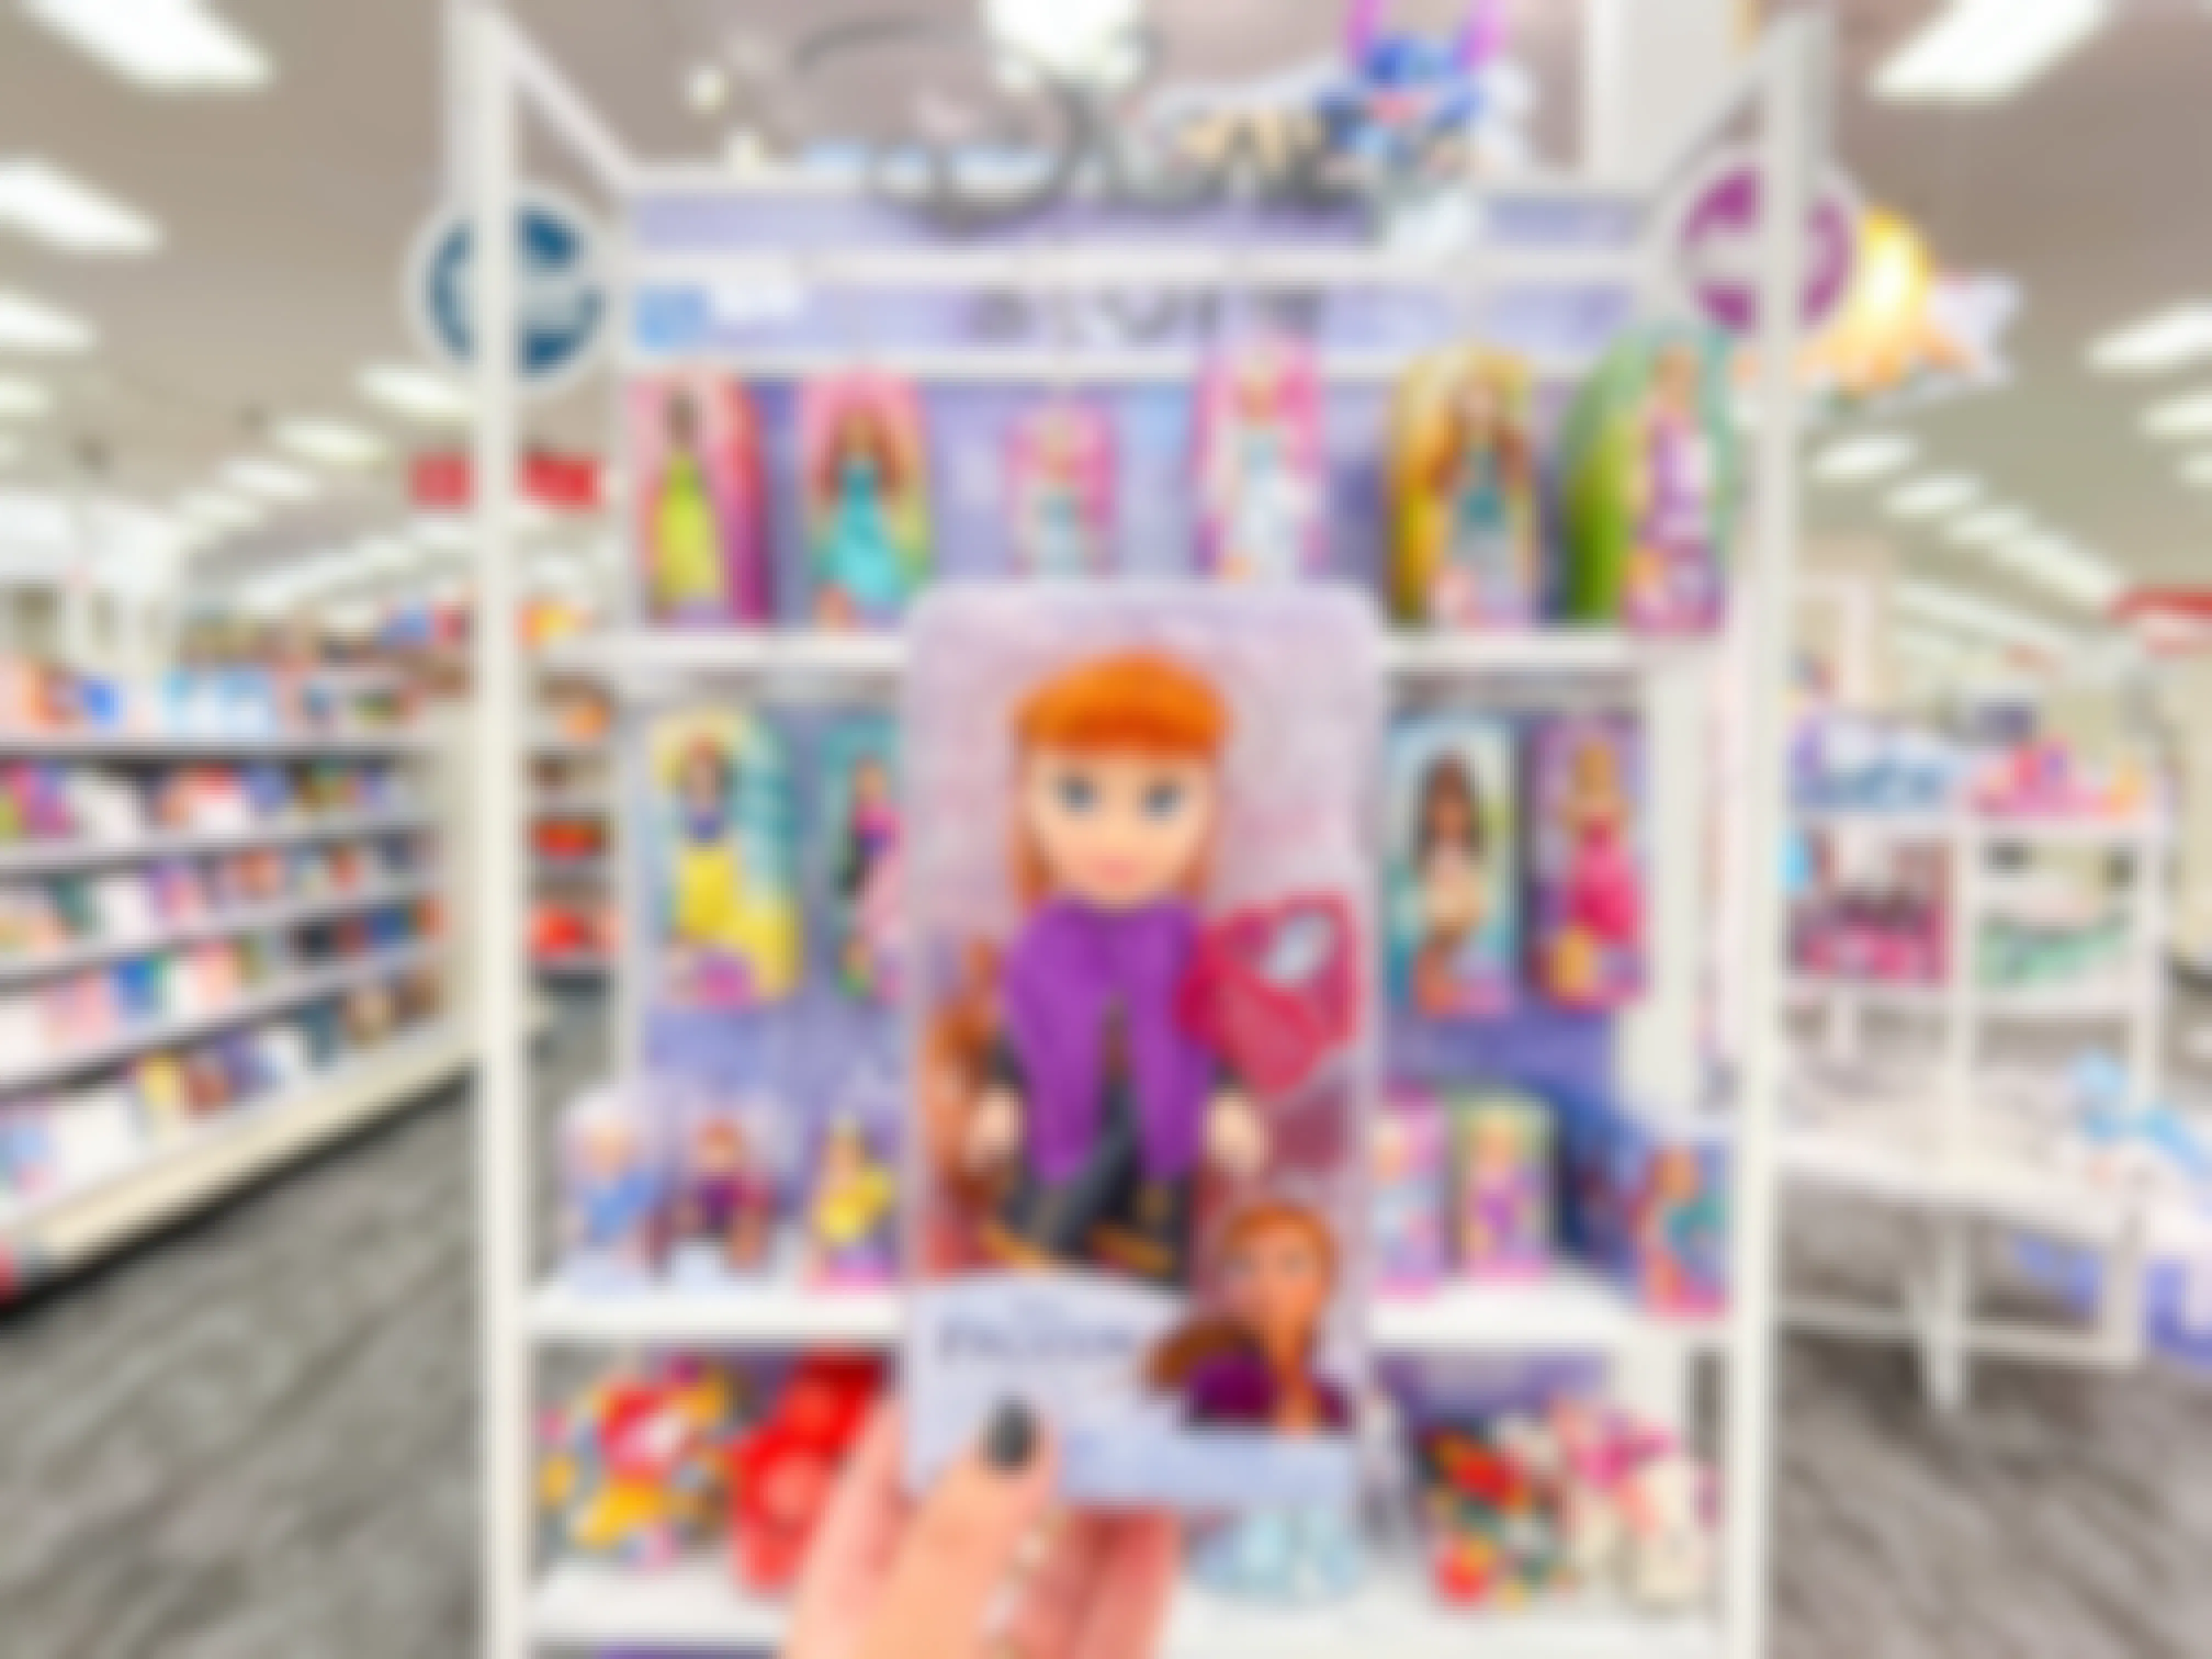 a hand holding up a disney frozen petite anna doll at Target